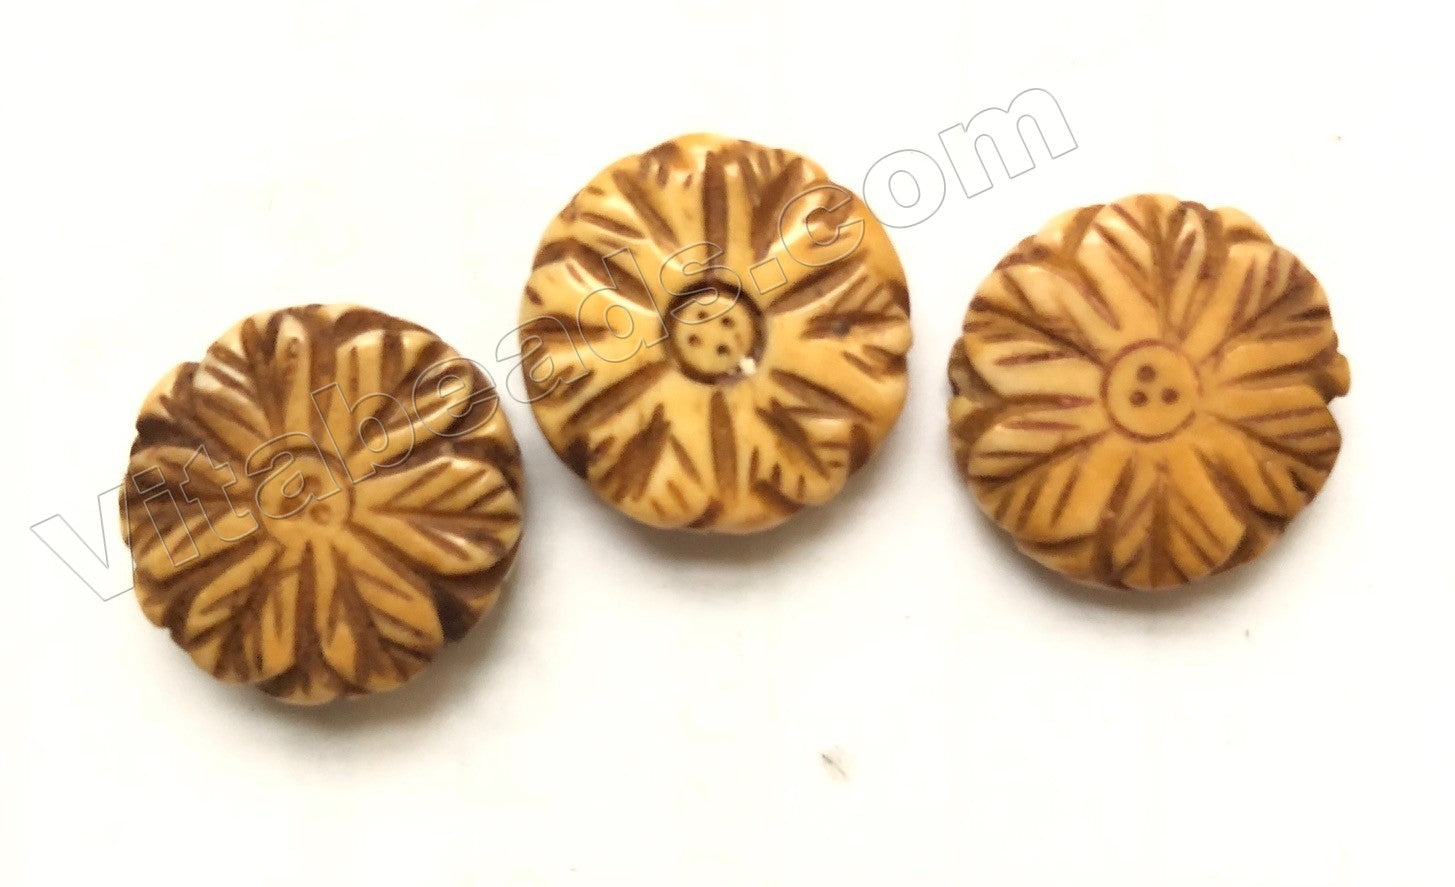 Flower Coin - Double Side 17 x 5 mm # 1